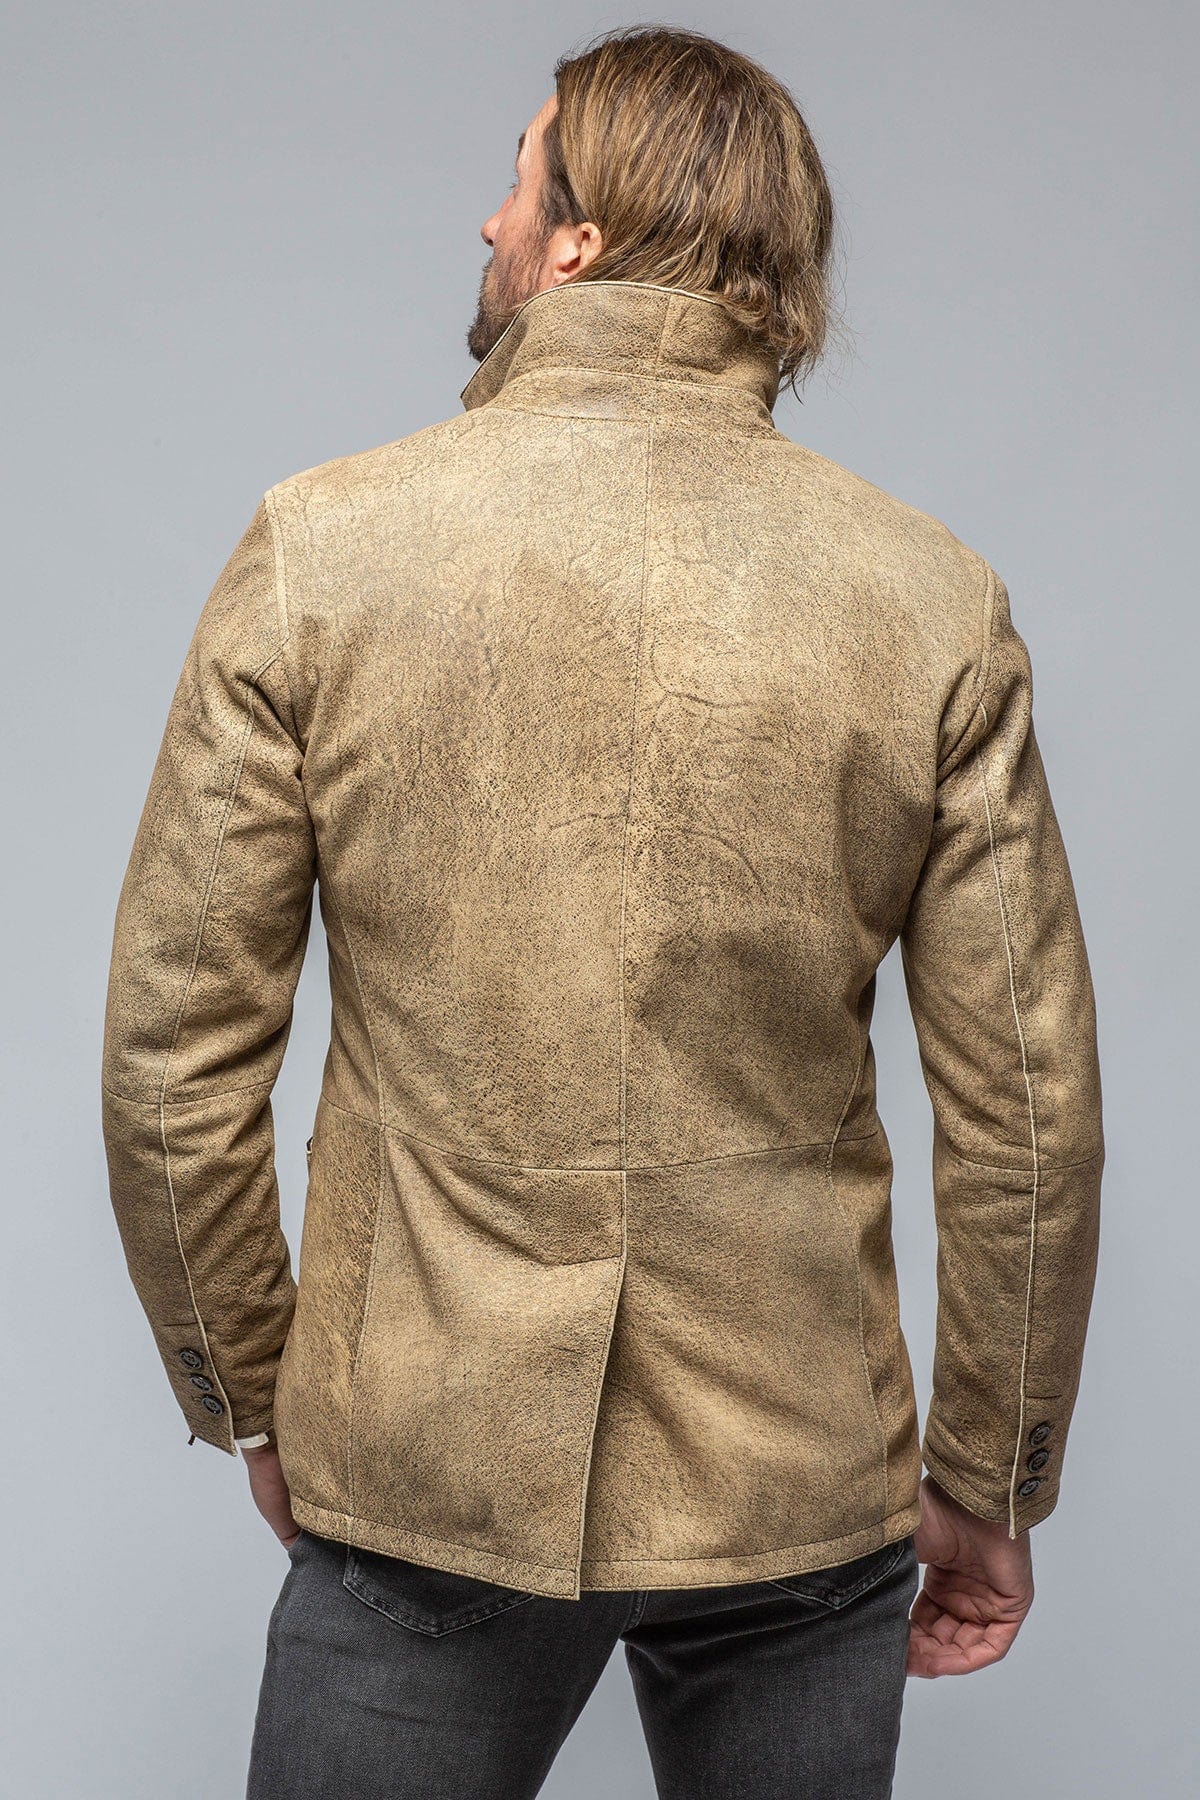 Mulholland Sport Jacket In Distressed Ice - AXEL'S